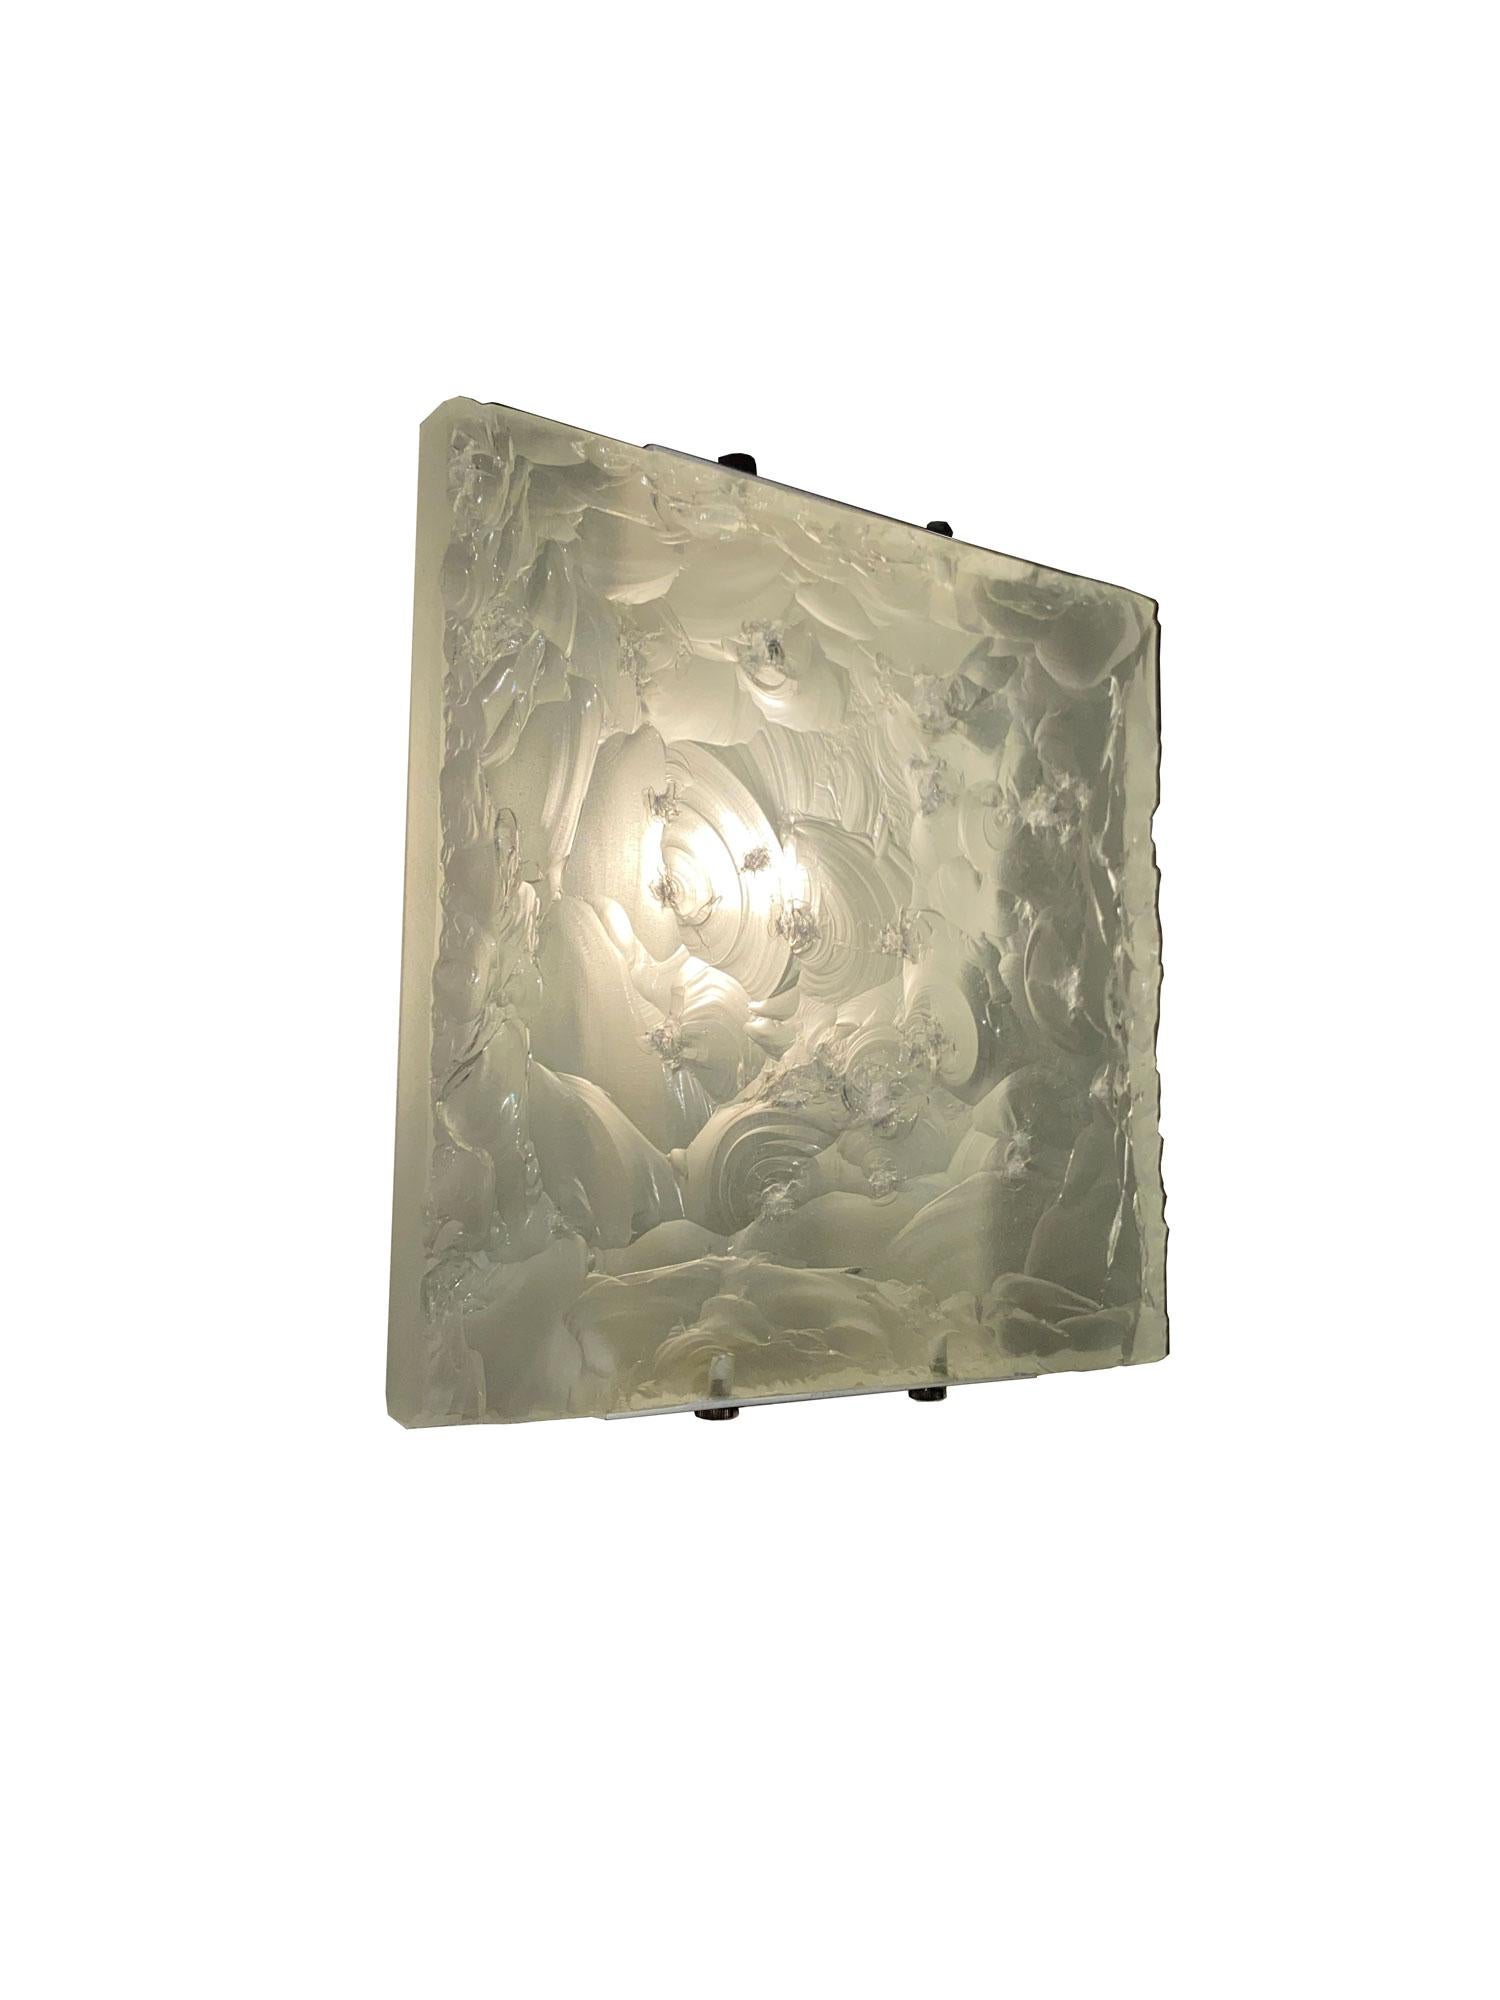 Max Ingrand
Chiseled glass sconces by Max Ingrand for Fontana Arte Mod. 2311, Italy, 1960s
3 wall lights, model no. 2311
Two in perfect condition 
One with damage (pictures).